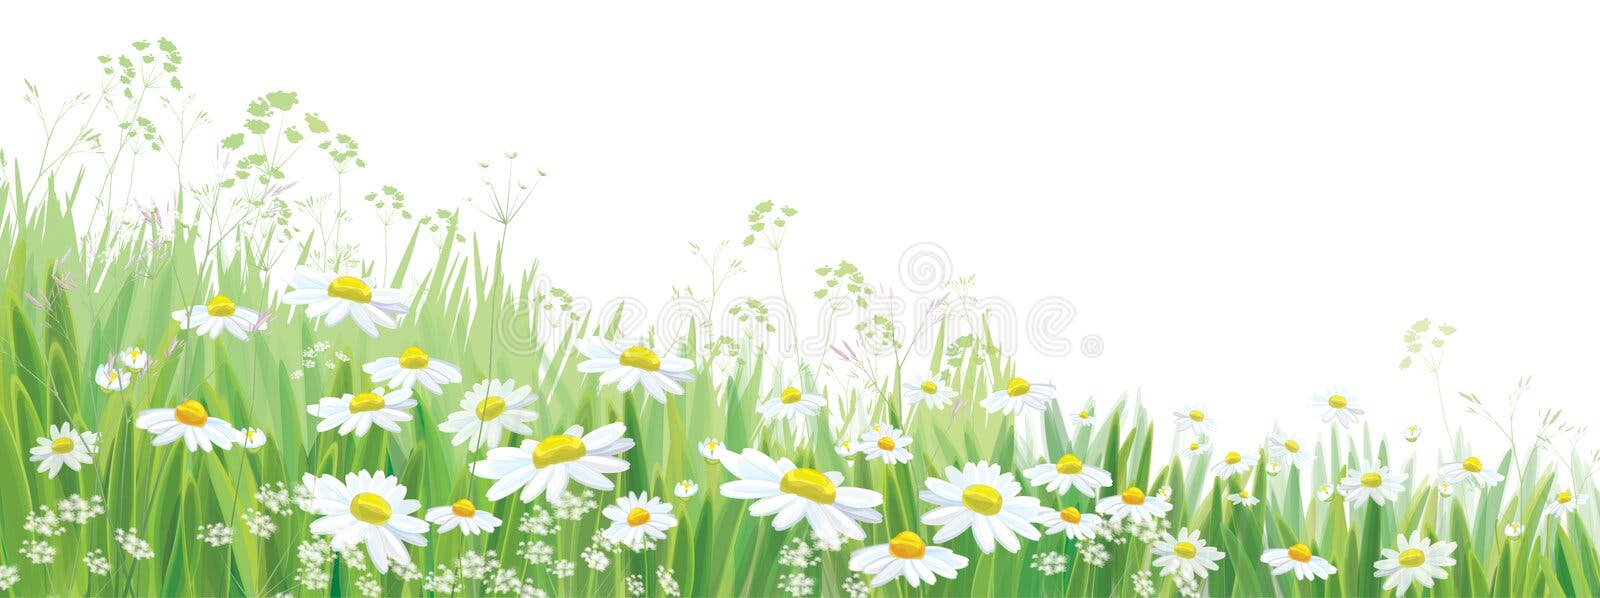 Bright Border of Green Grass with Spring Flowers. Template for ...